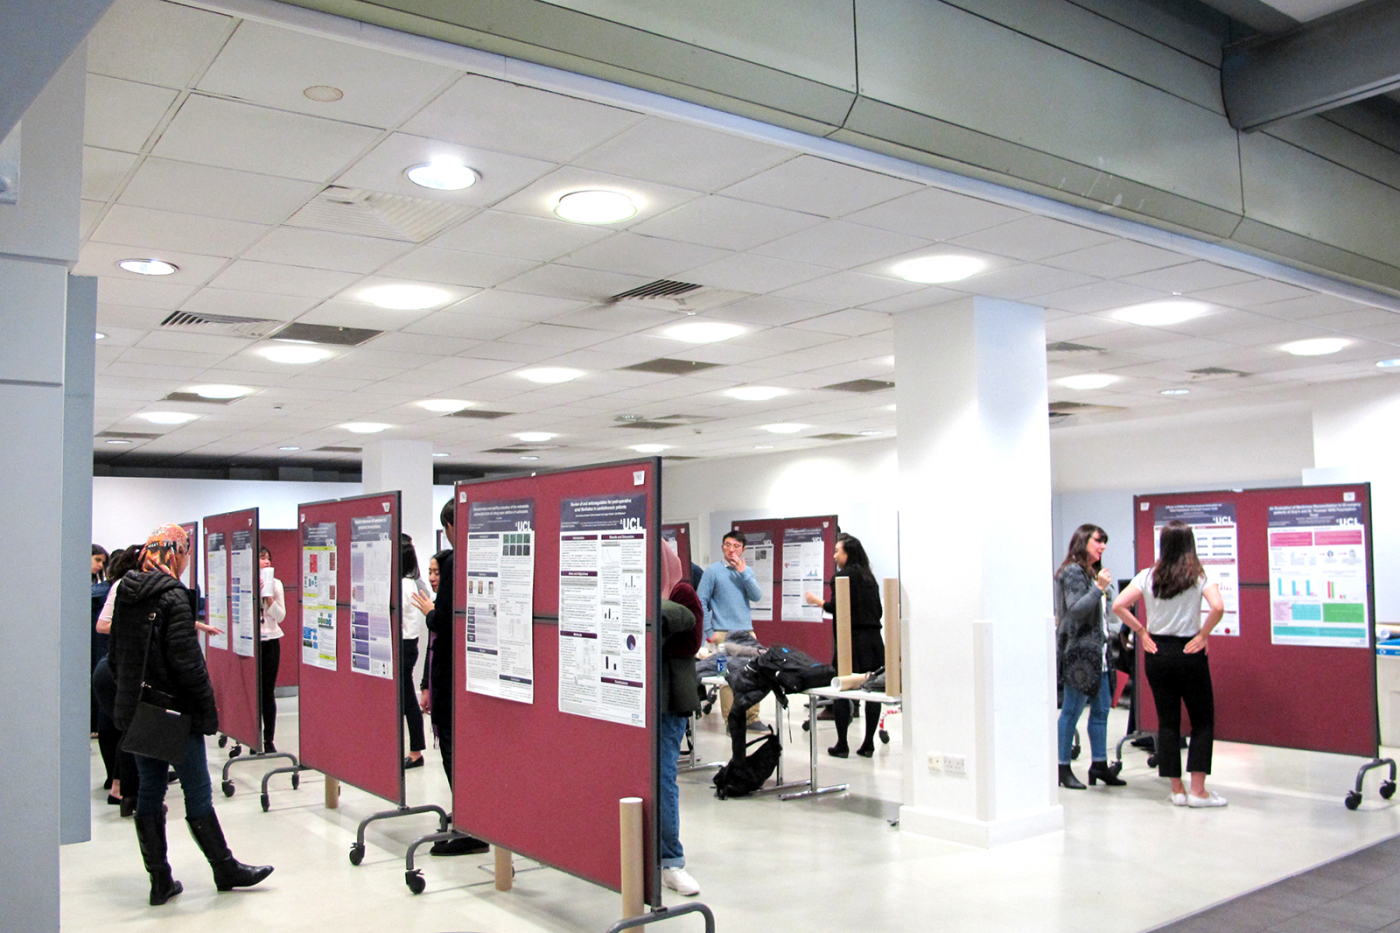 4th Year School of Pharmacy Poster Display Event